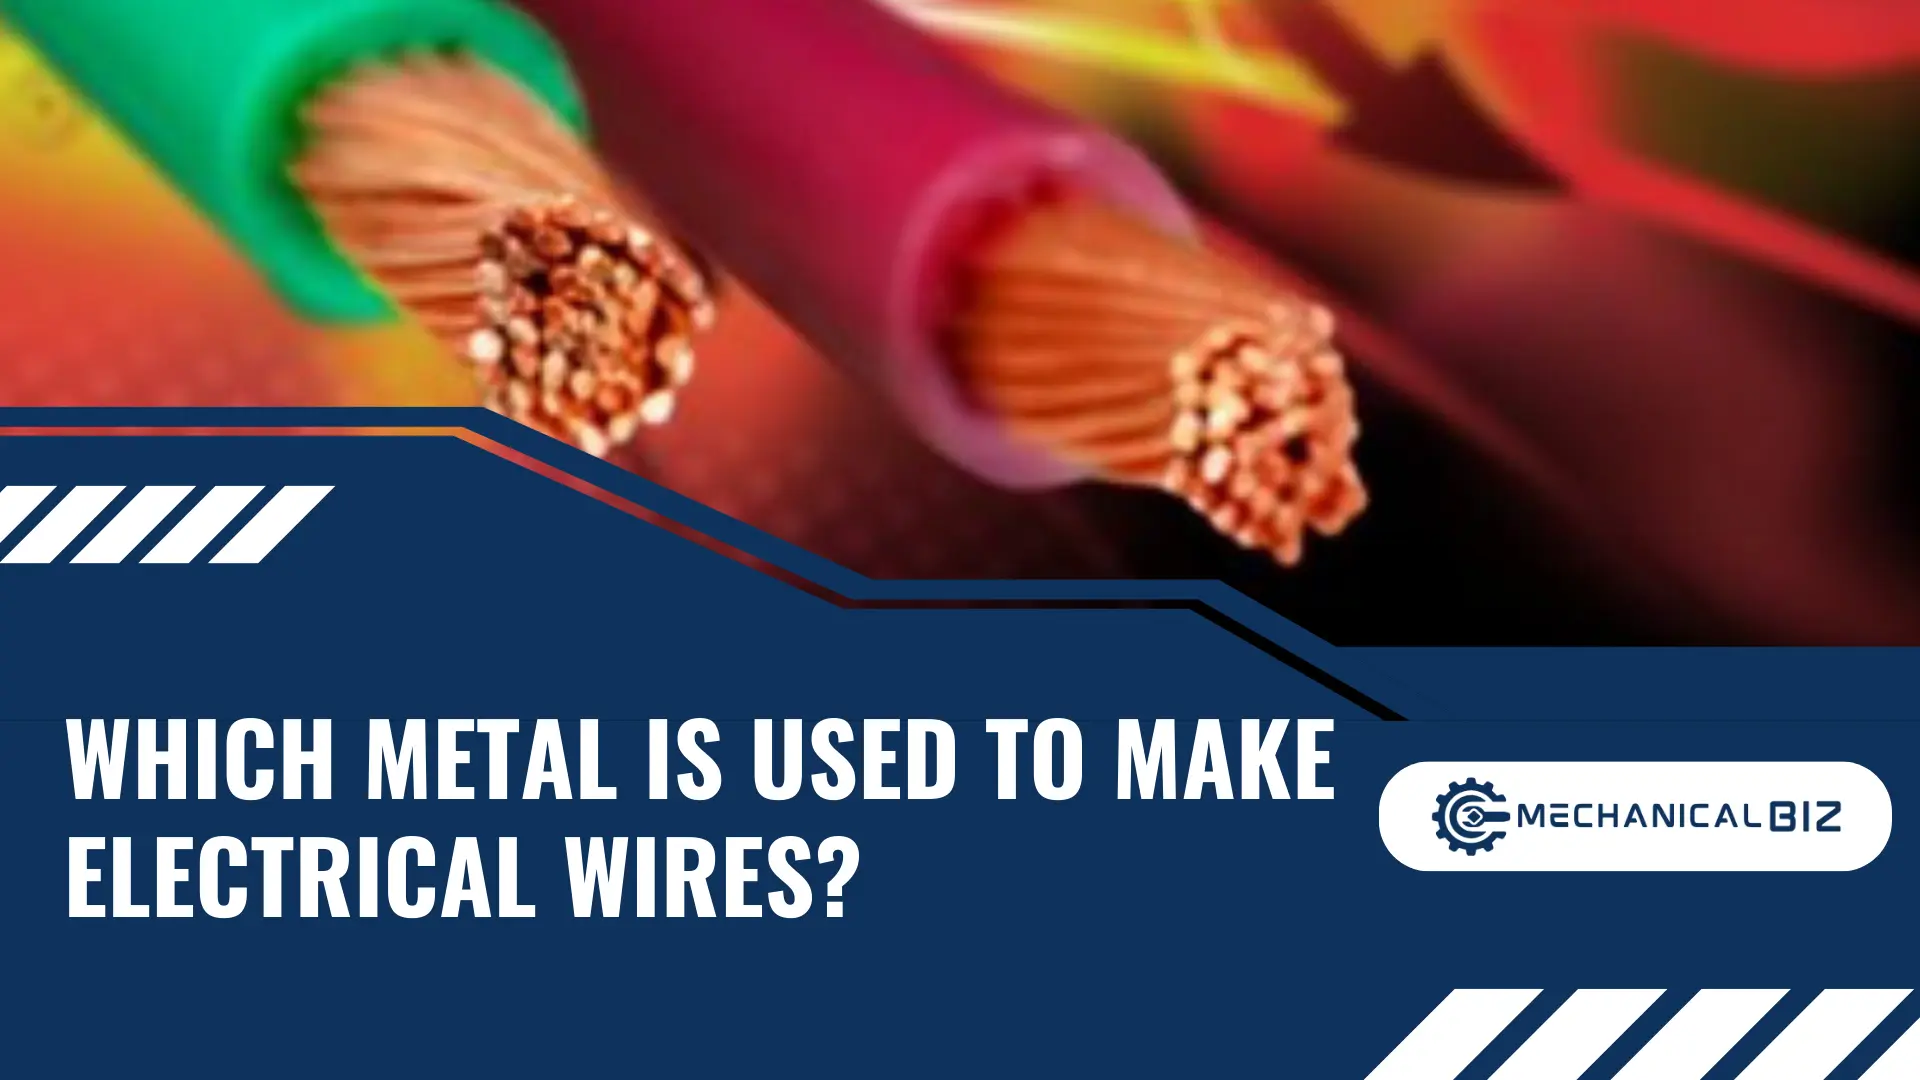 Which Metal is Used to Make Electrical Wires